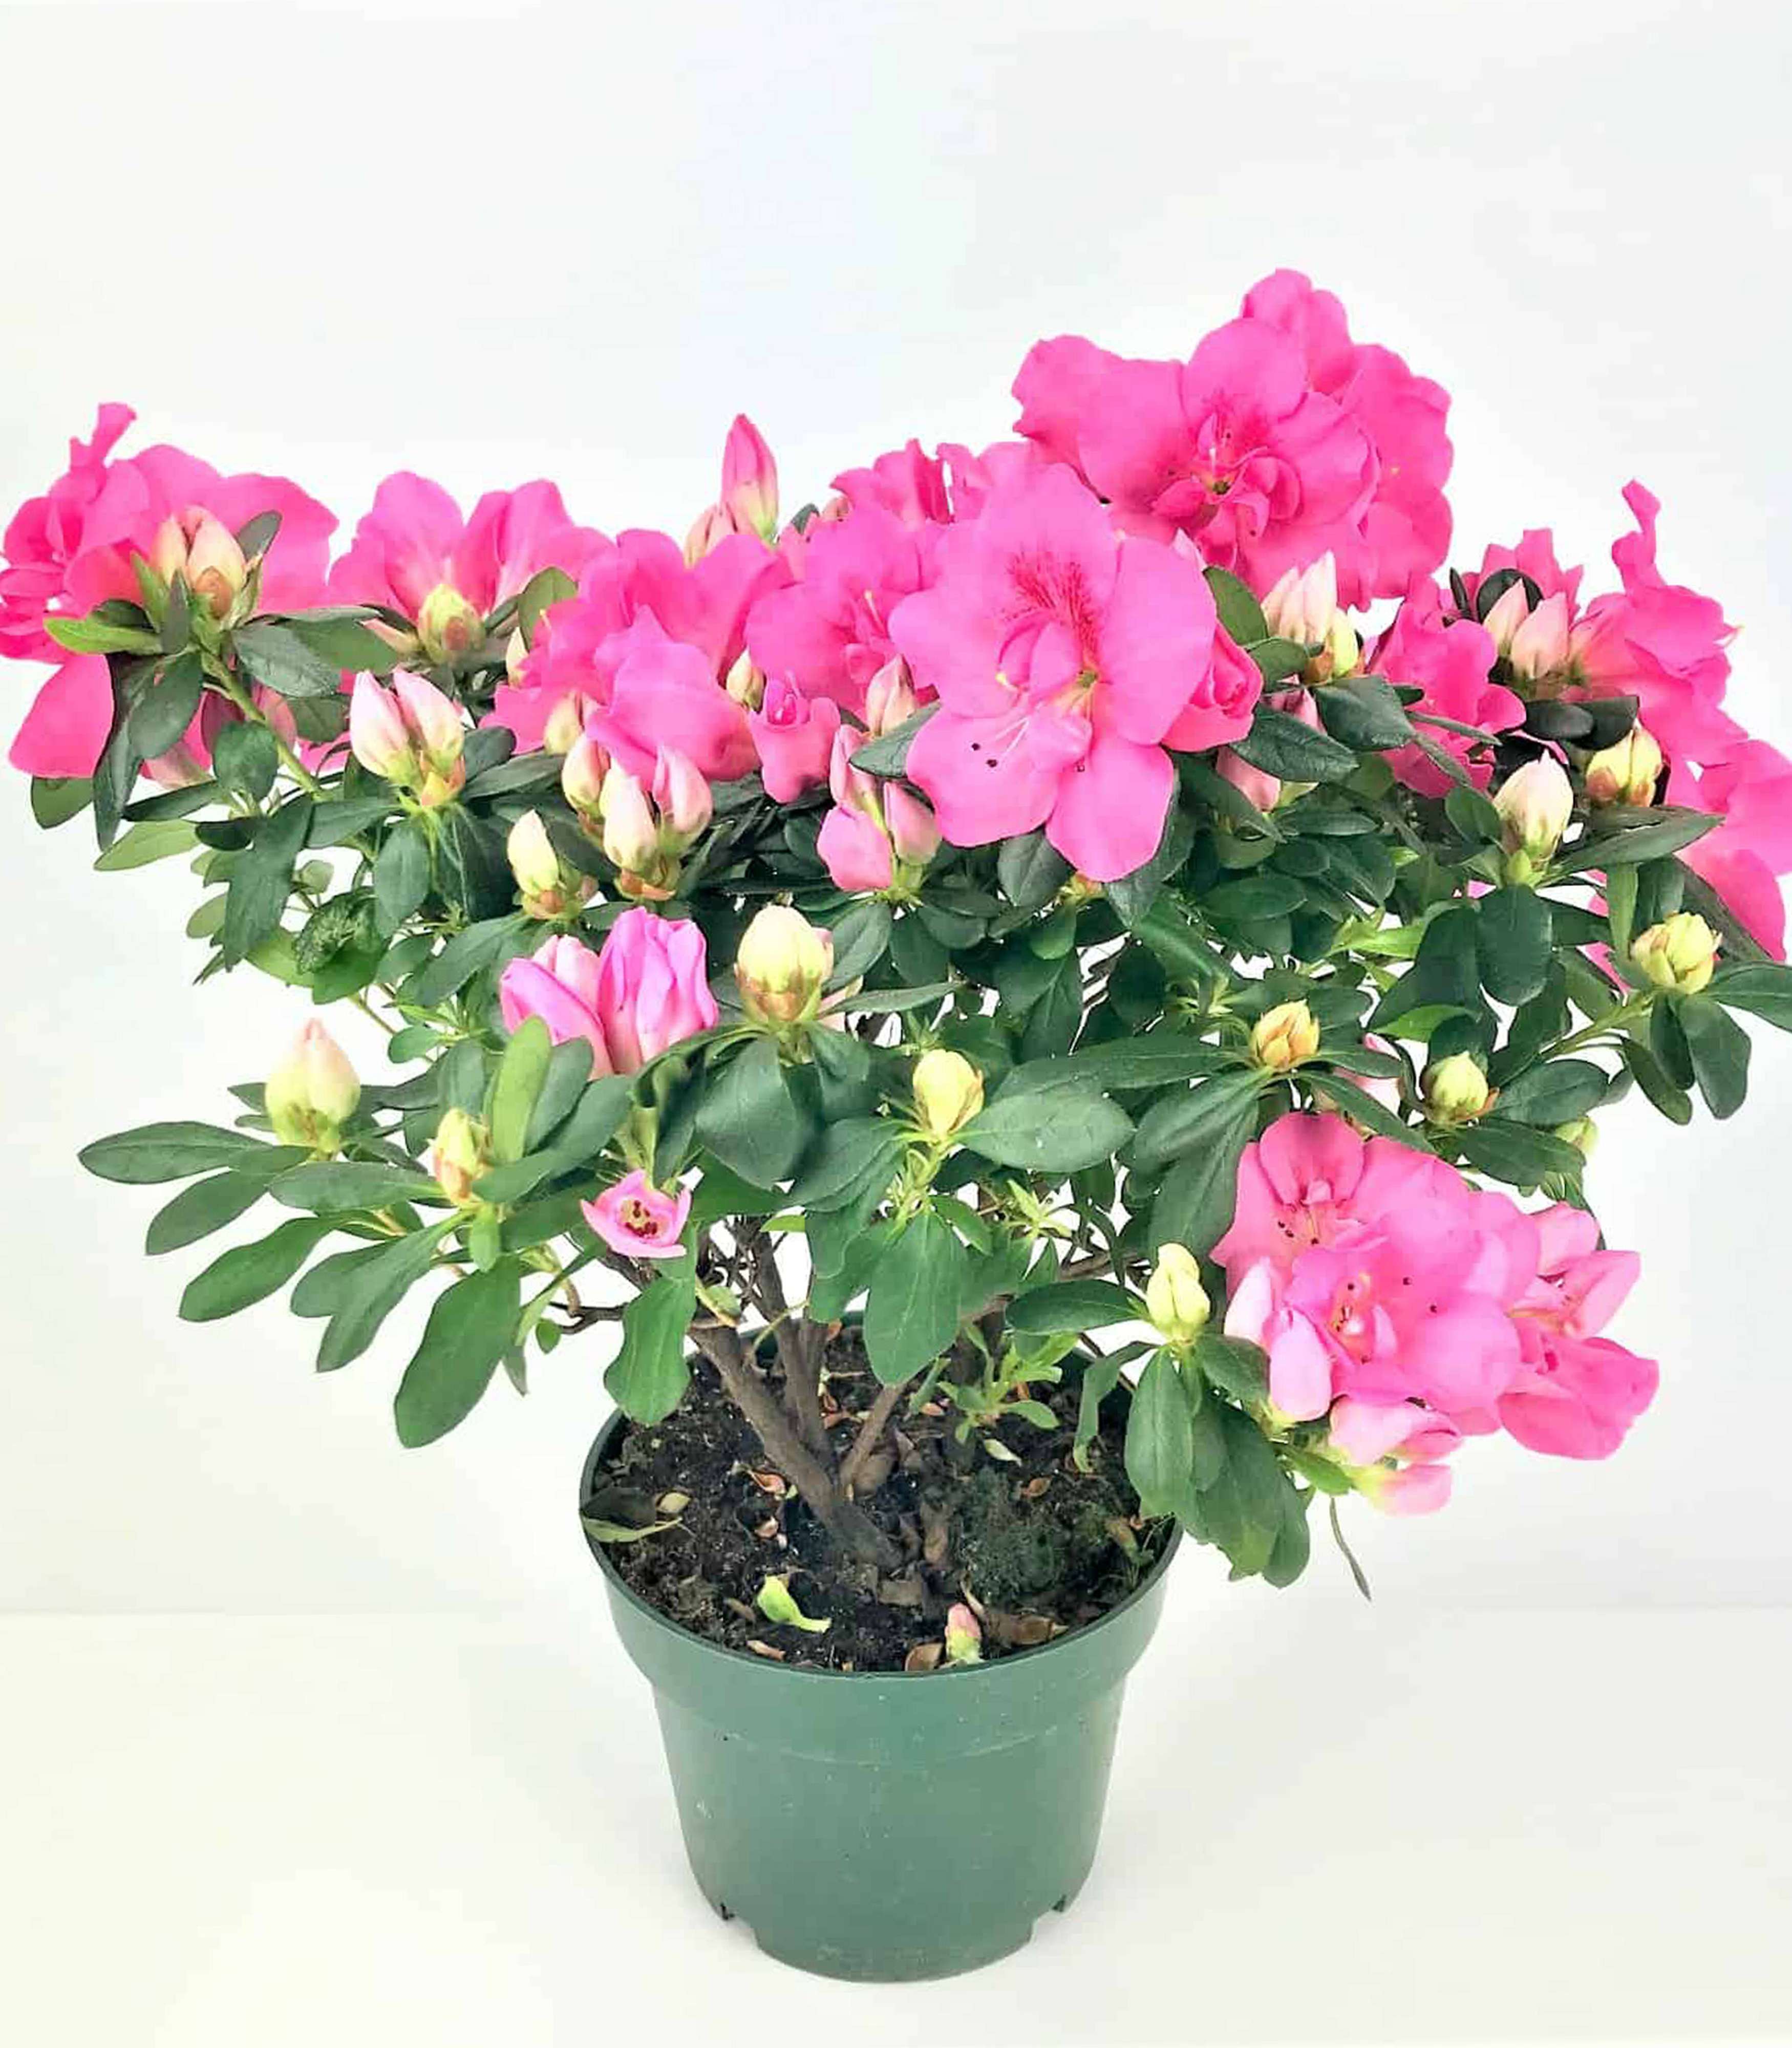 Azalea or rhododendron - growing conditions with photo / video | farra.com